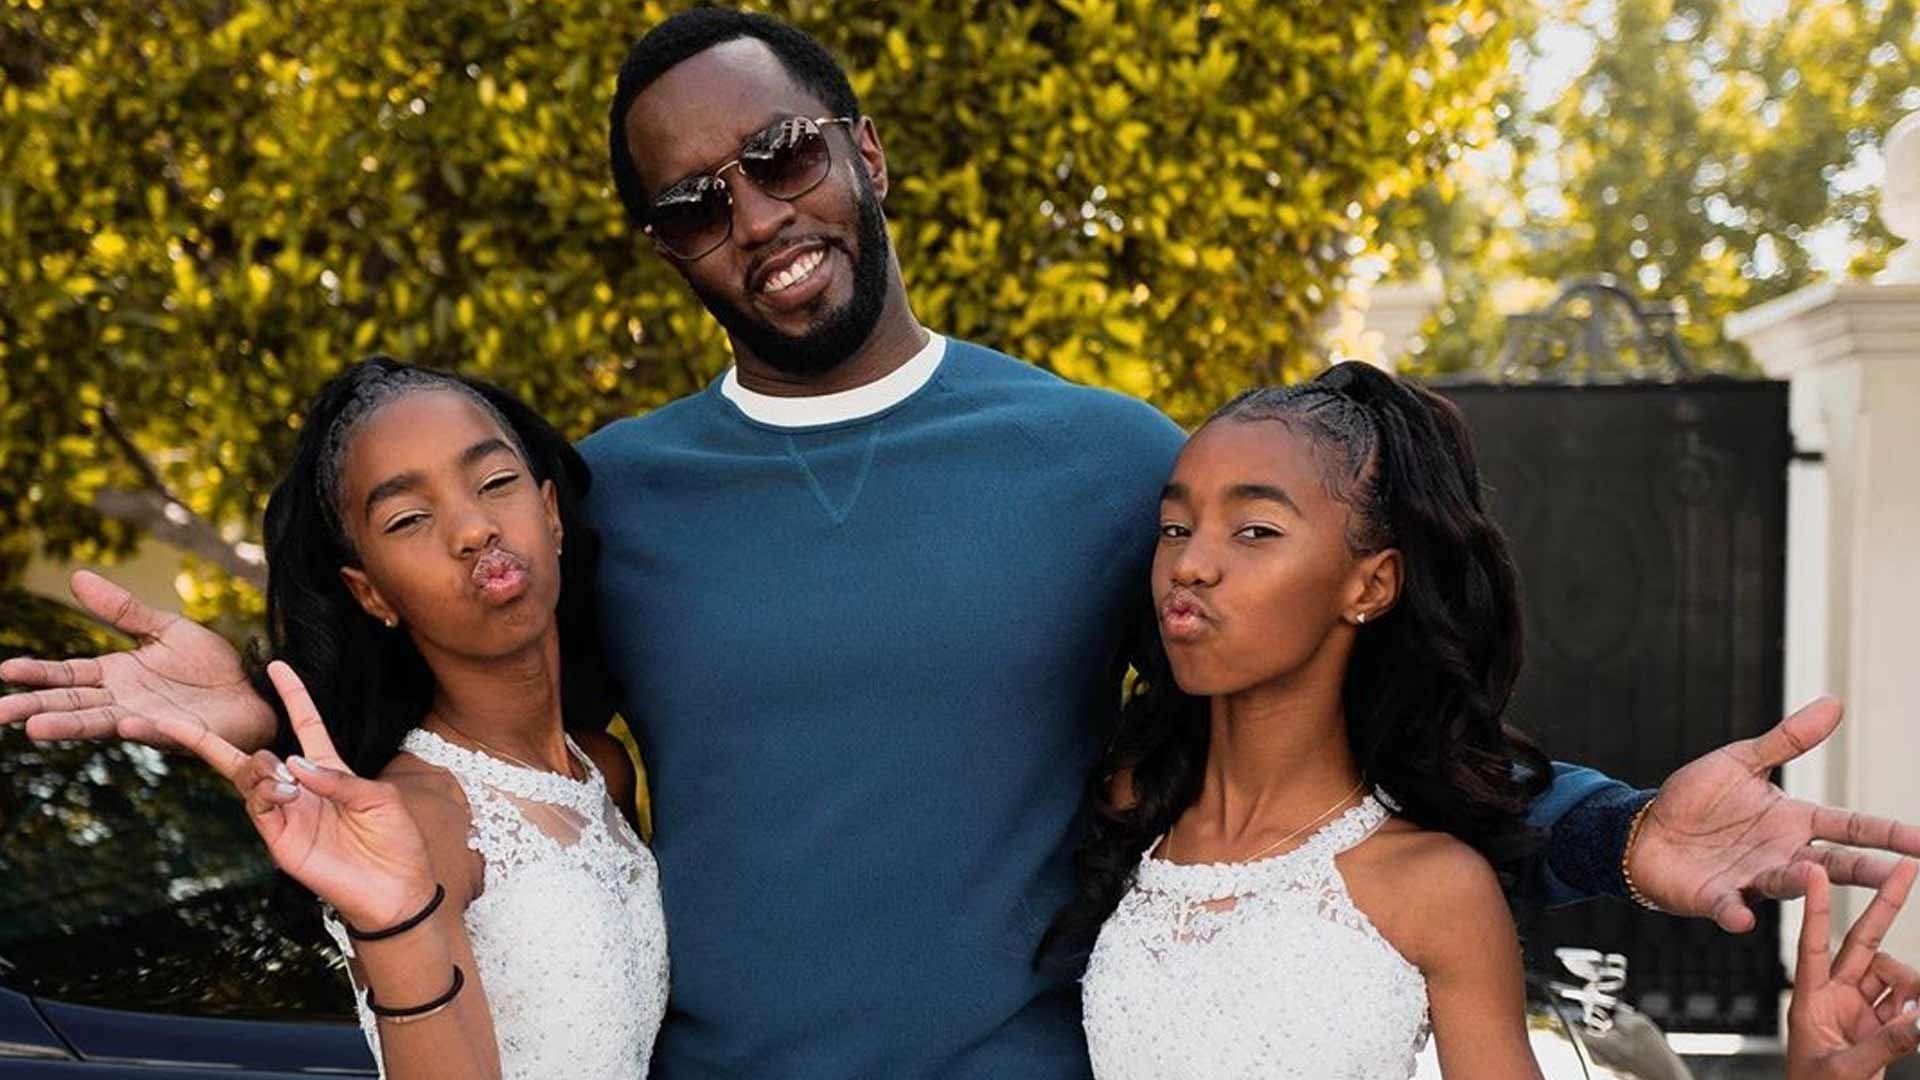 Diddy Celebrates The 13th Anniversary Of His Twin Daughters, Jessie And D’Lila - See The Video Read His Emotional Message